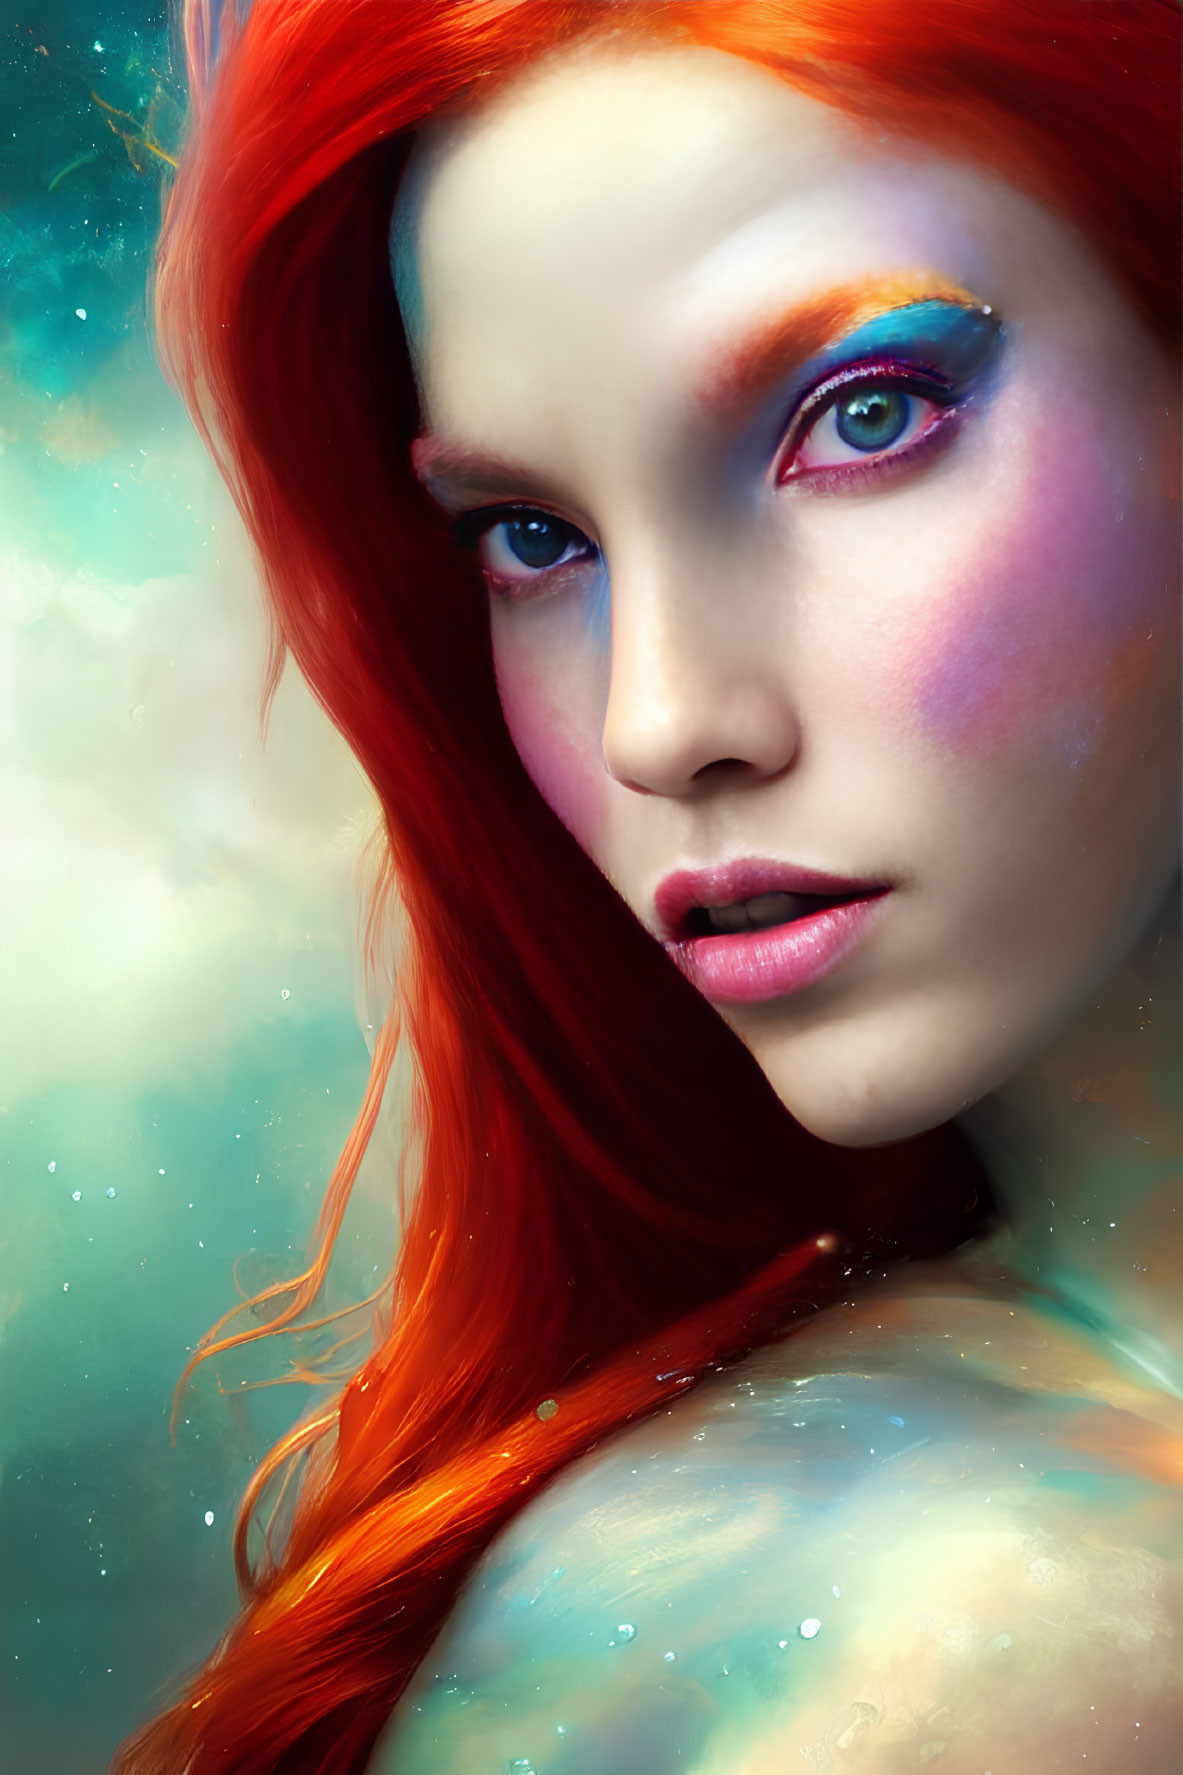 Vibrant red hair and rainbow makeup portrait on cloud background